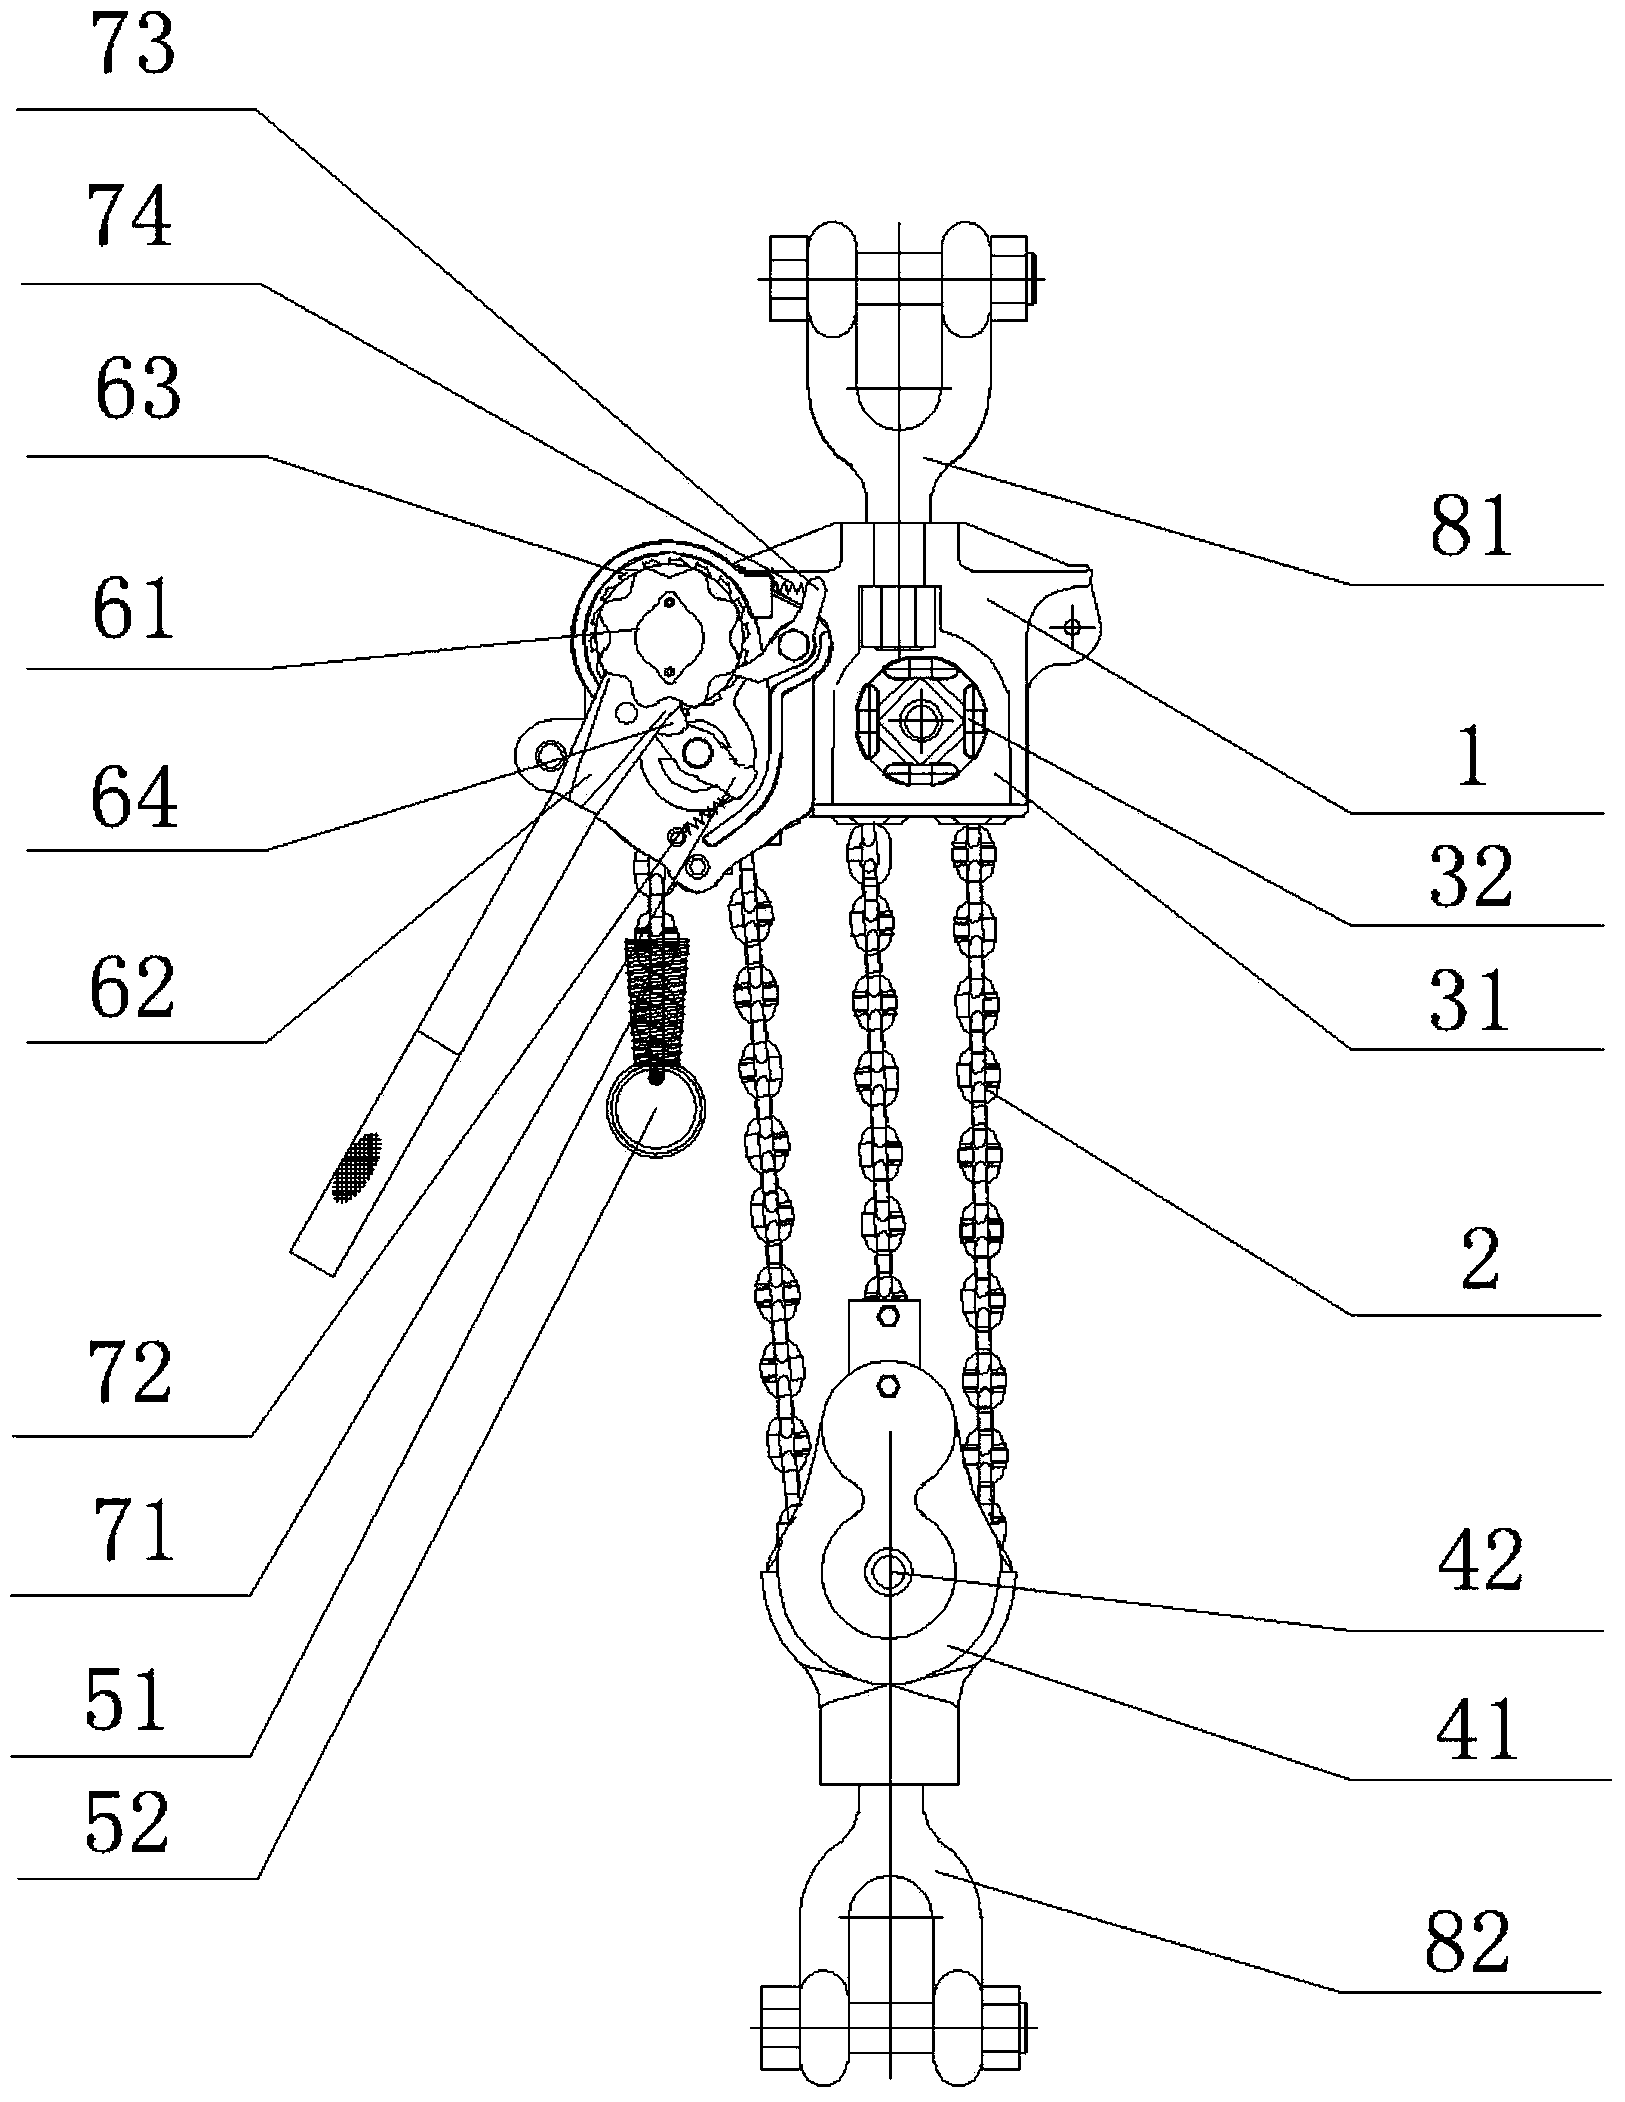 Lever pulley block convenient to use